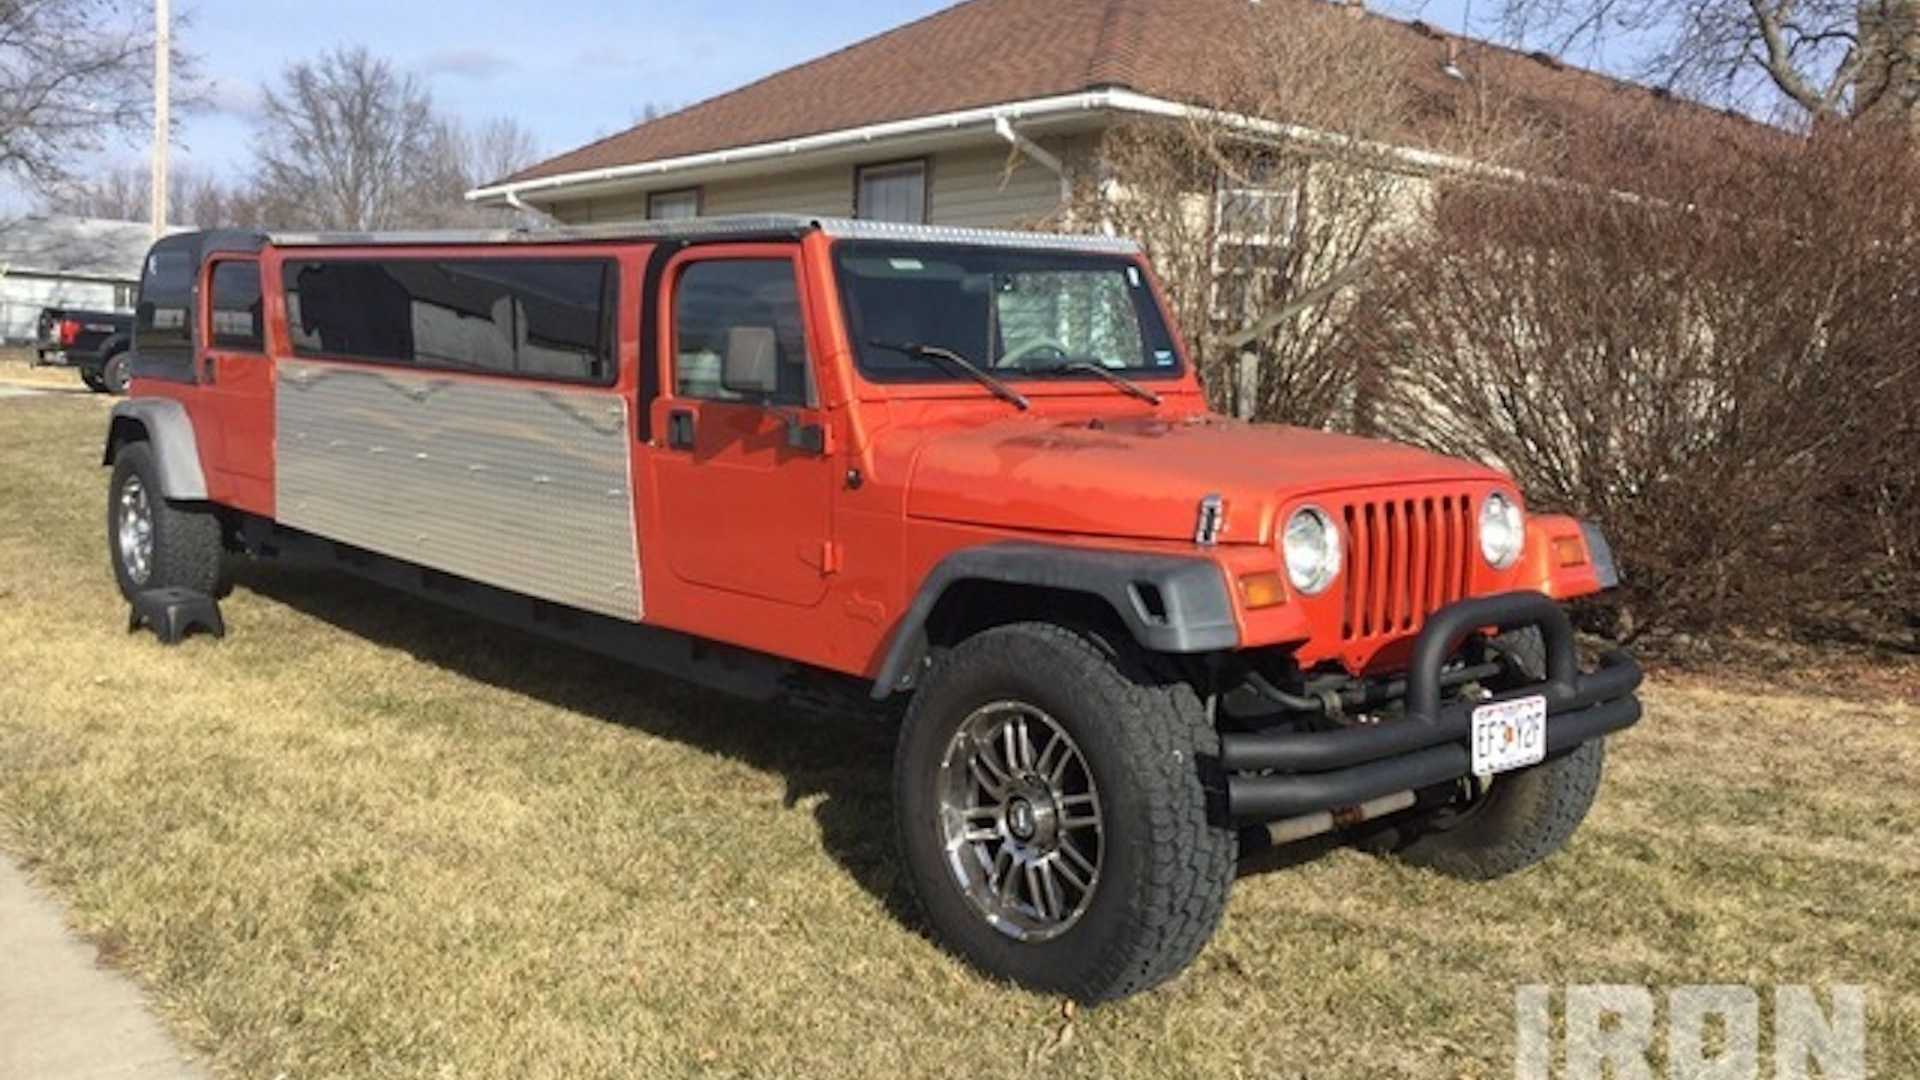 1997 red Jeep Wrangler stretched into a homemade limo